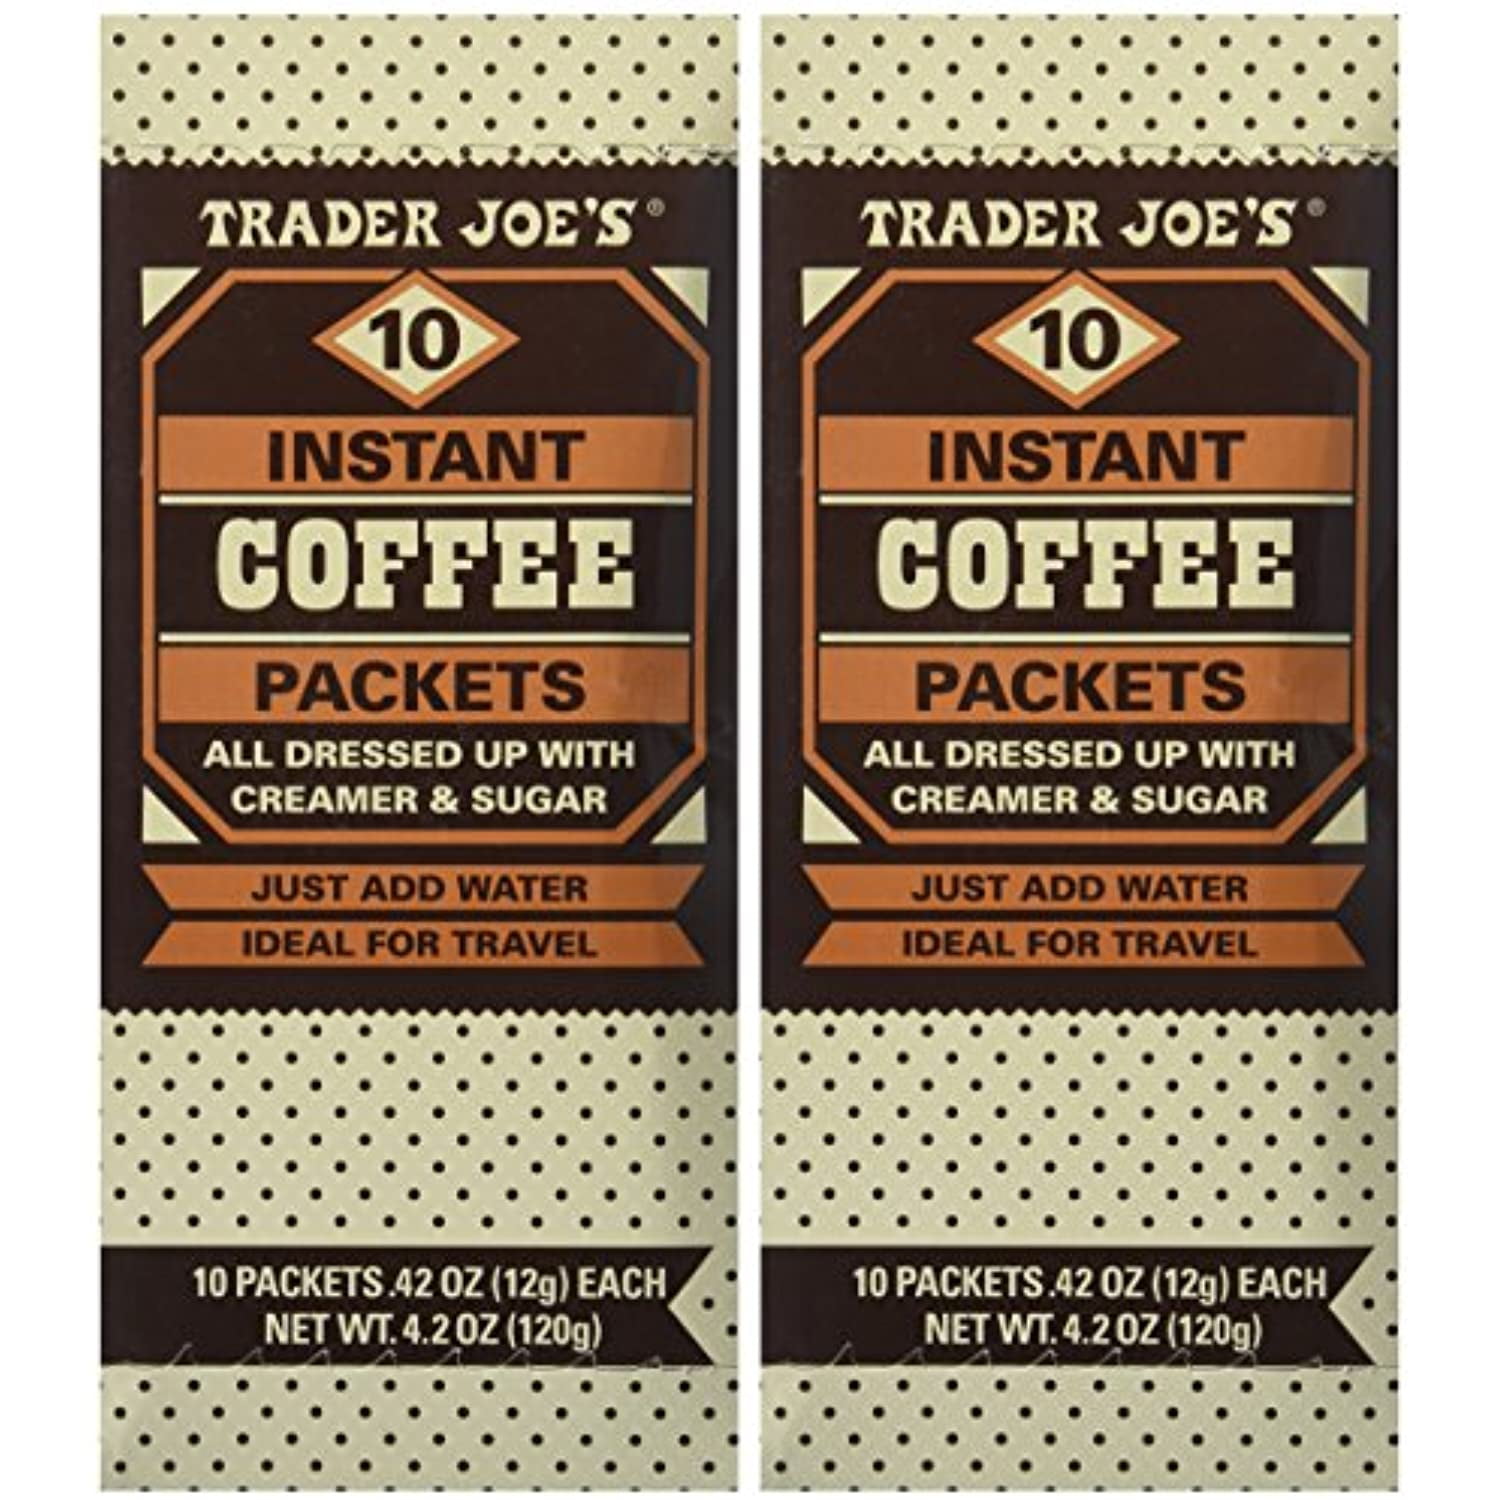 TJ Instant Coffee Packets With Creamer & Sugar 10 Packets, 4.2 Oz